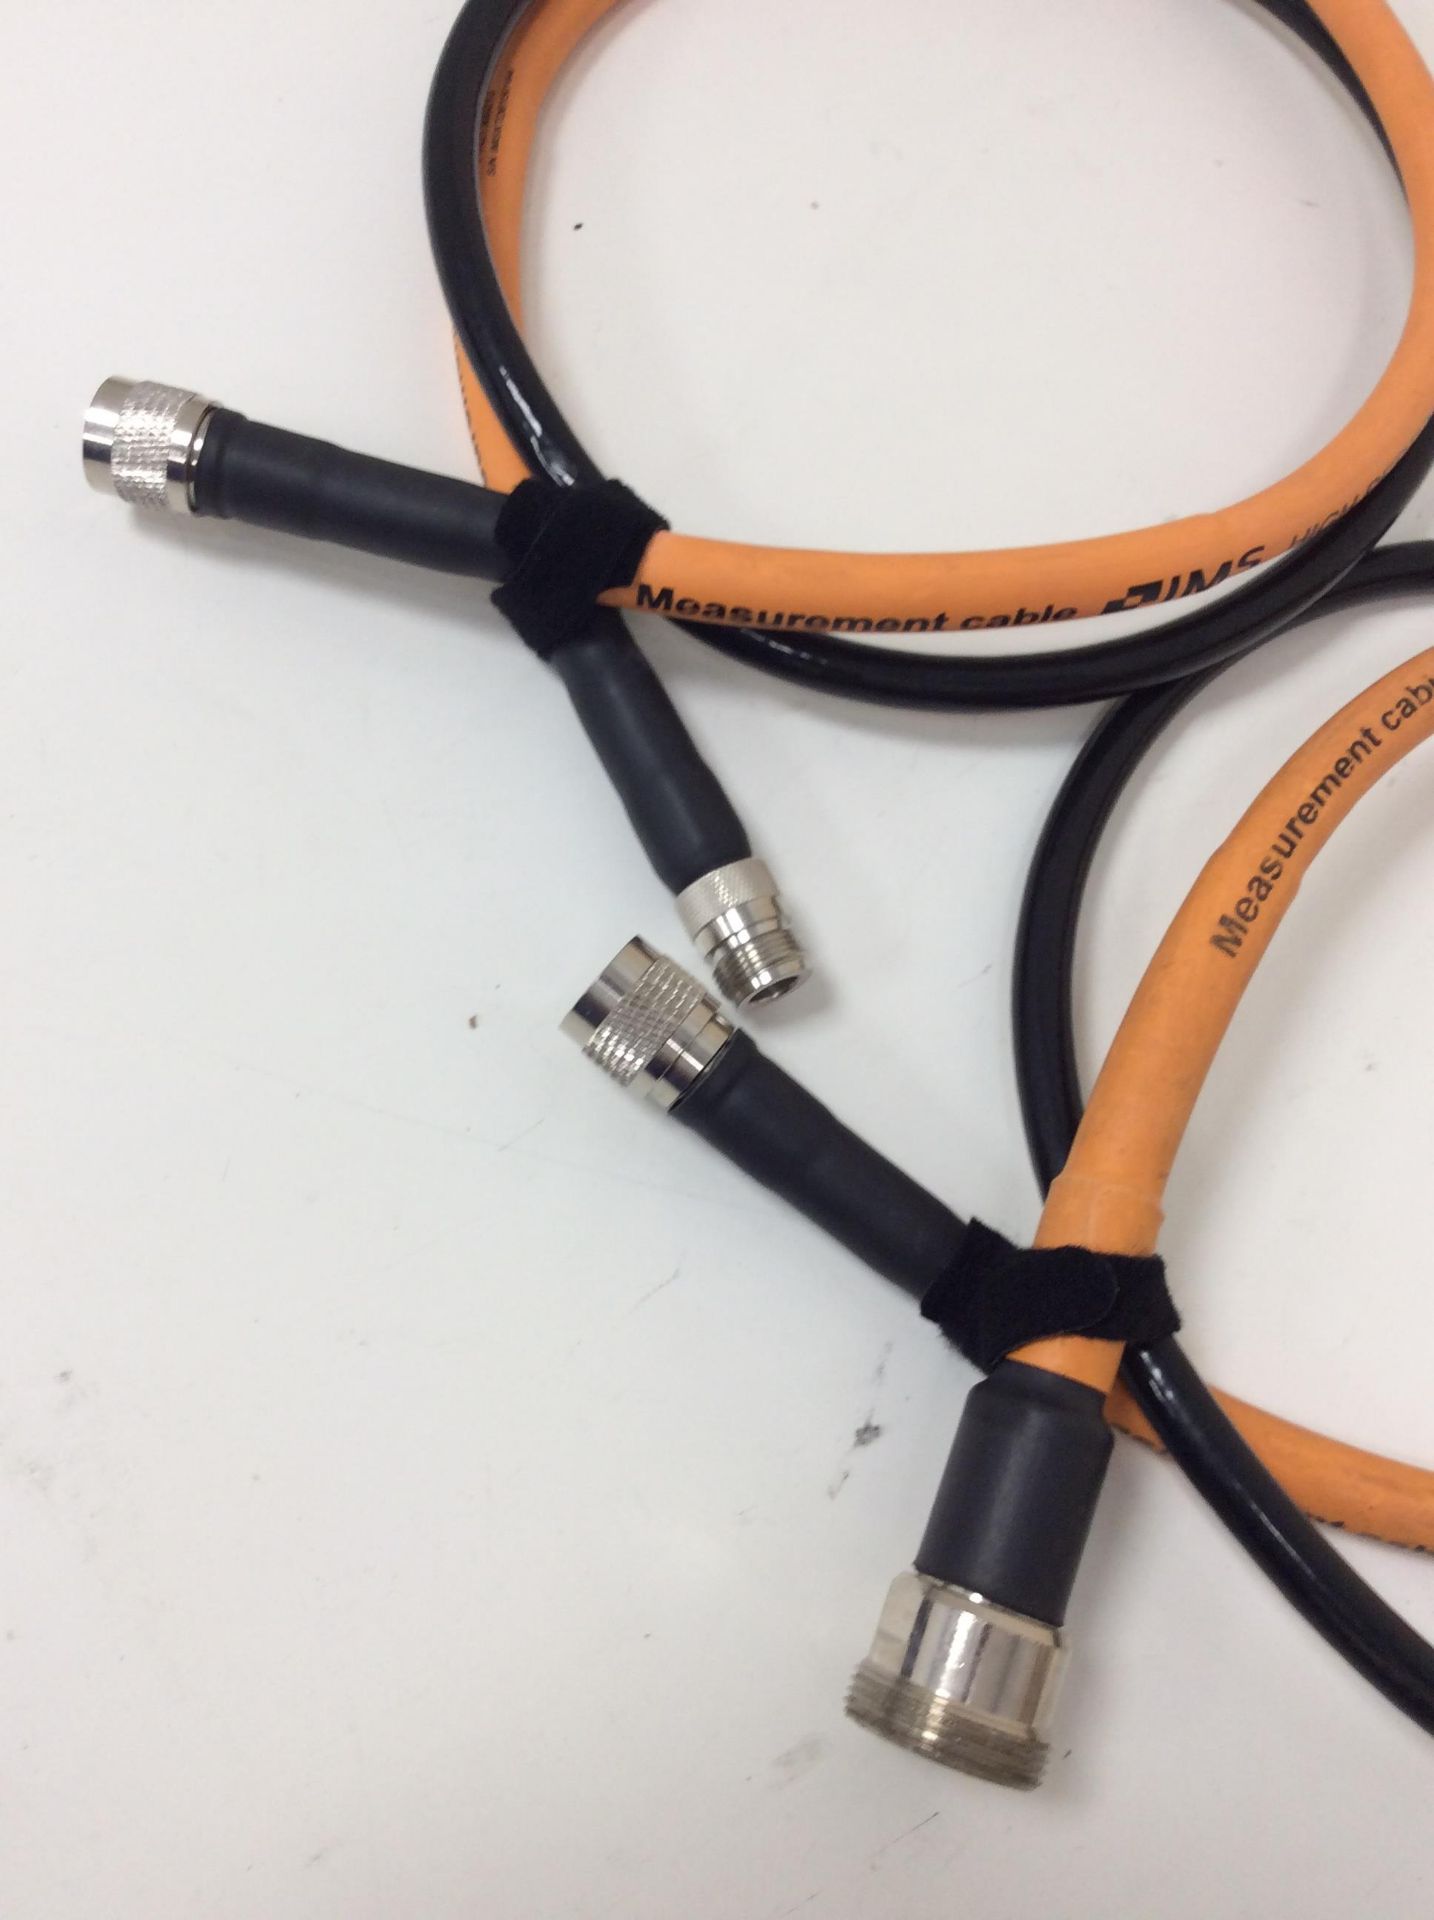 2x ims high performance test assemblies measurement cable 1m - Image 3 of 3